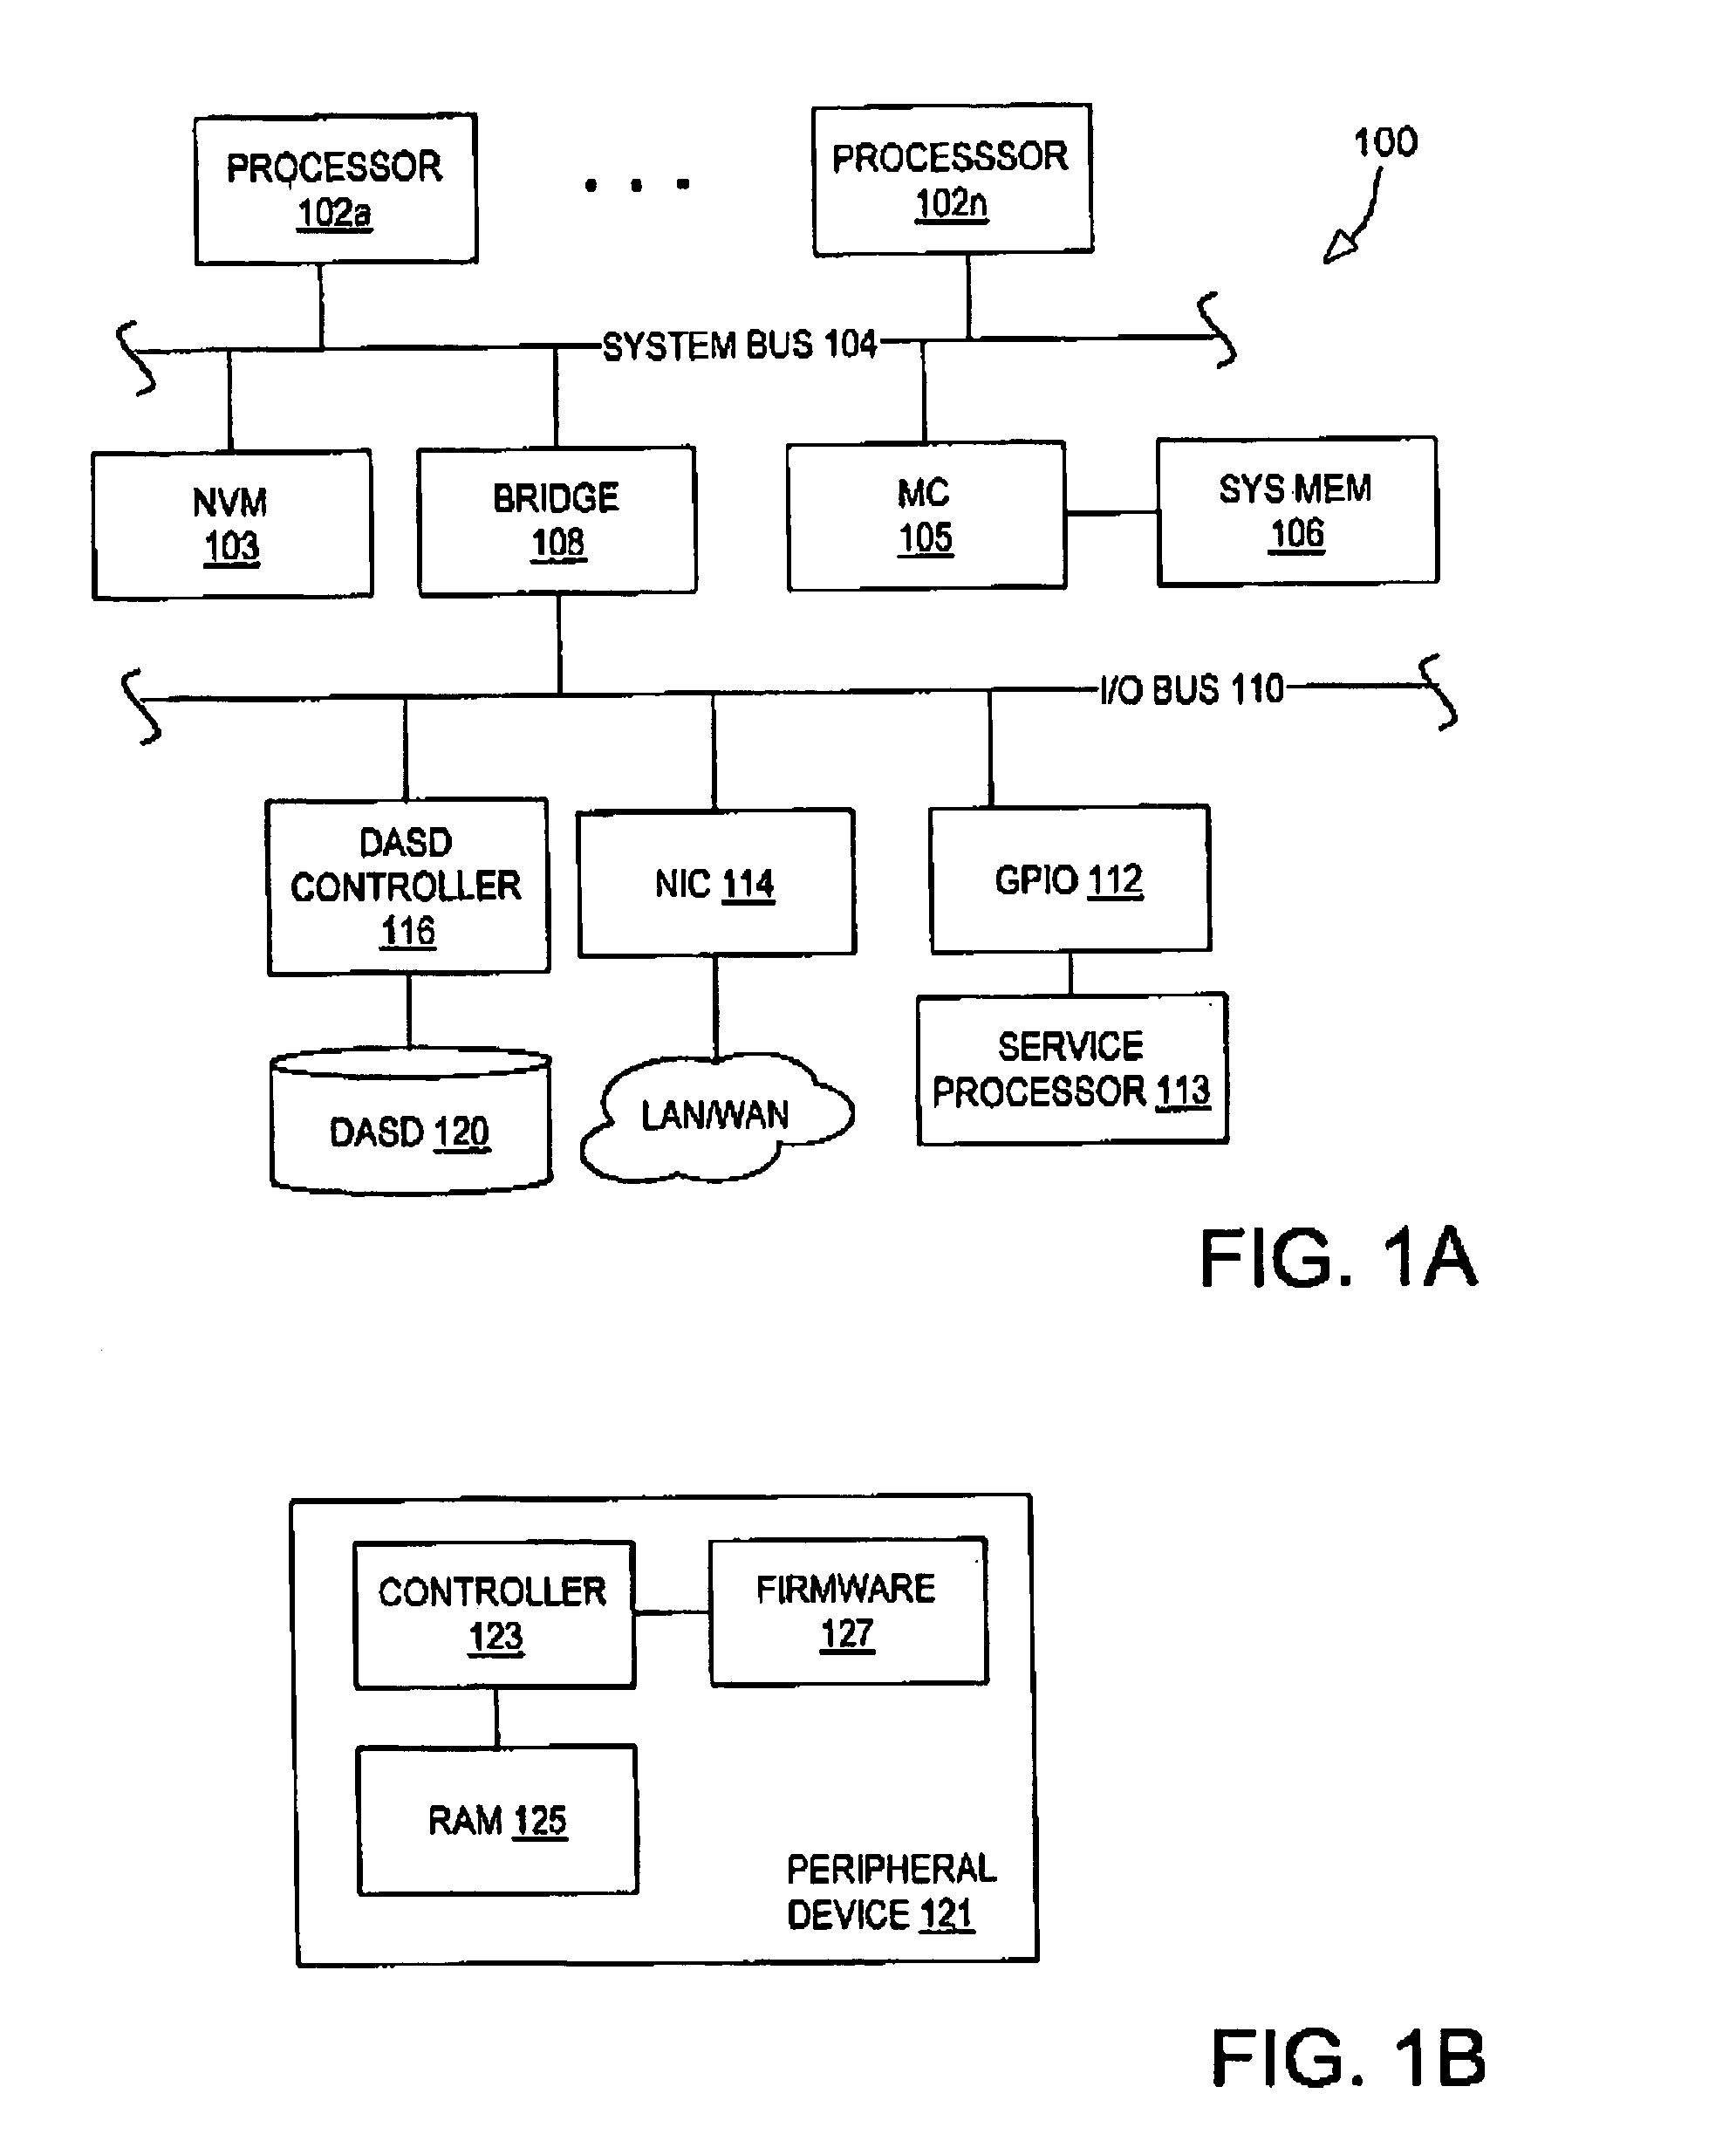 Method and system for maintaining firmware versions in a data processing system